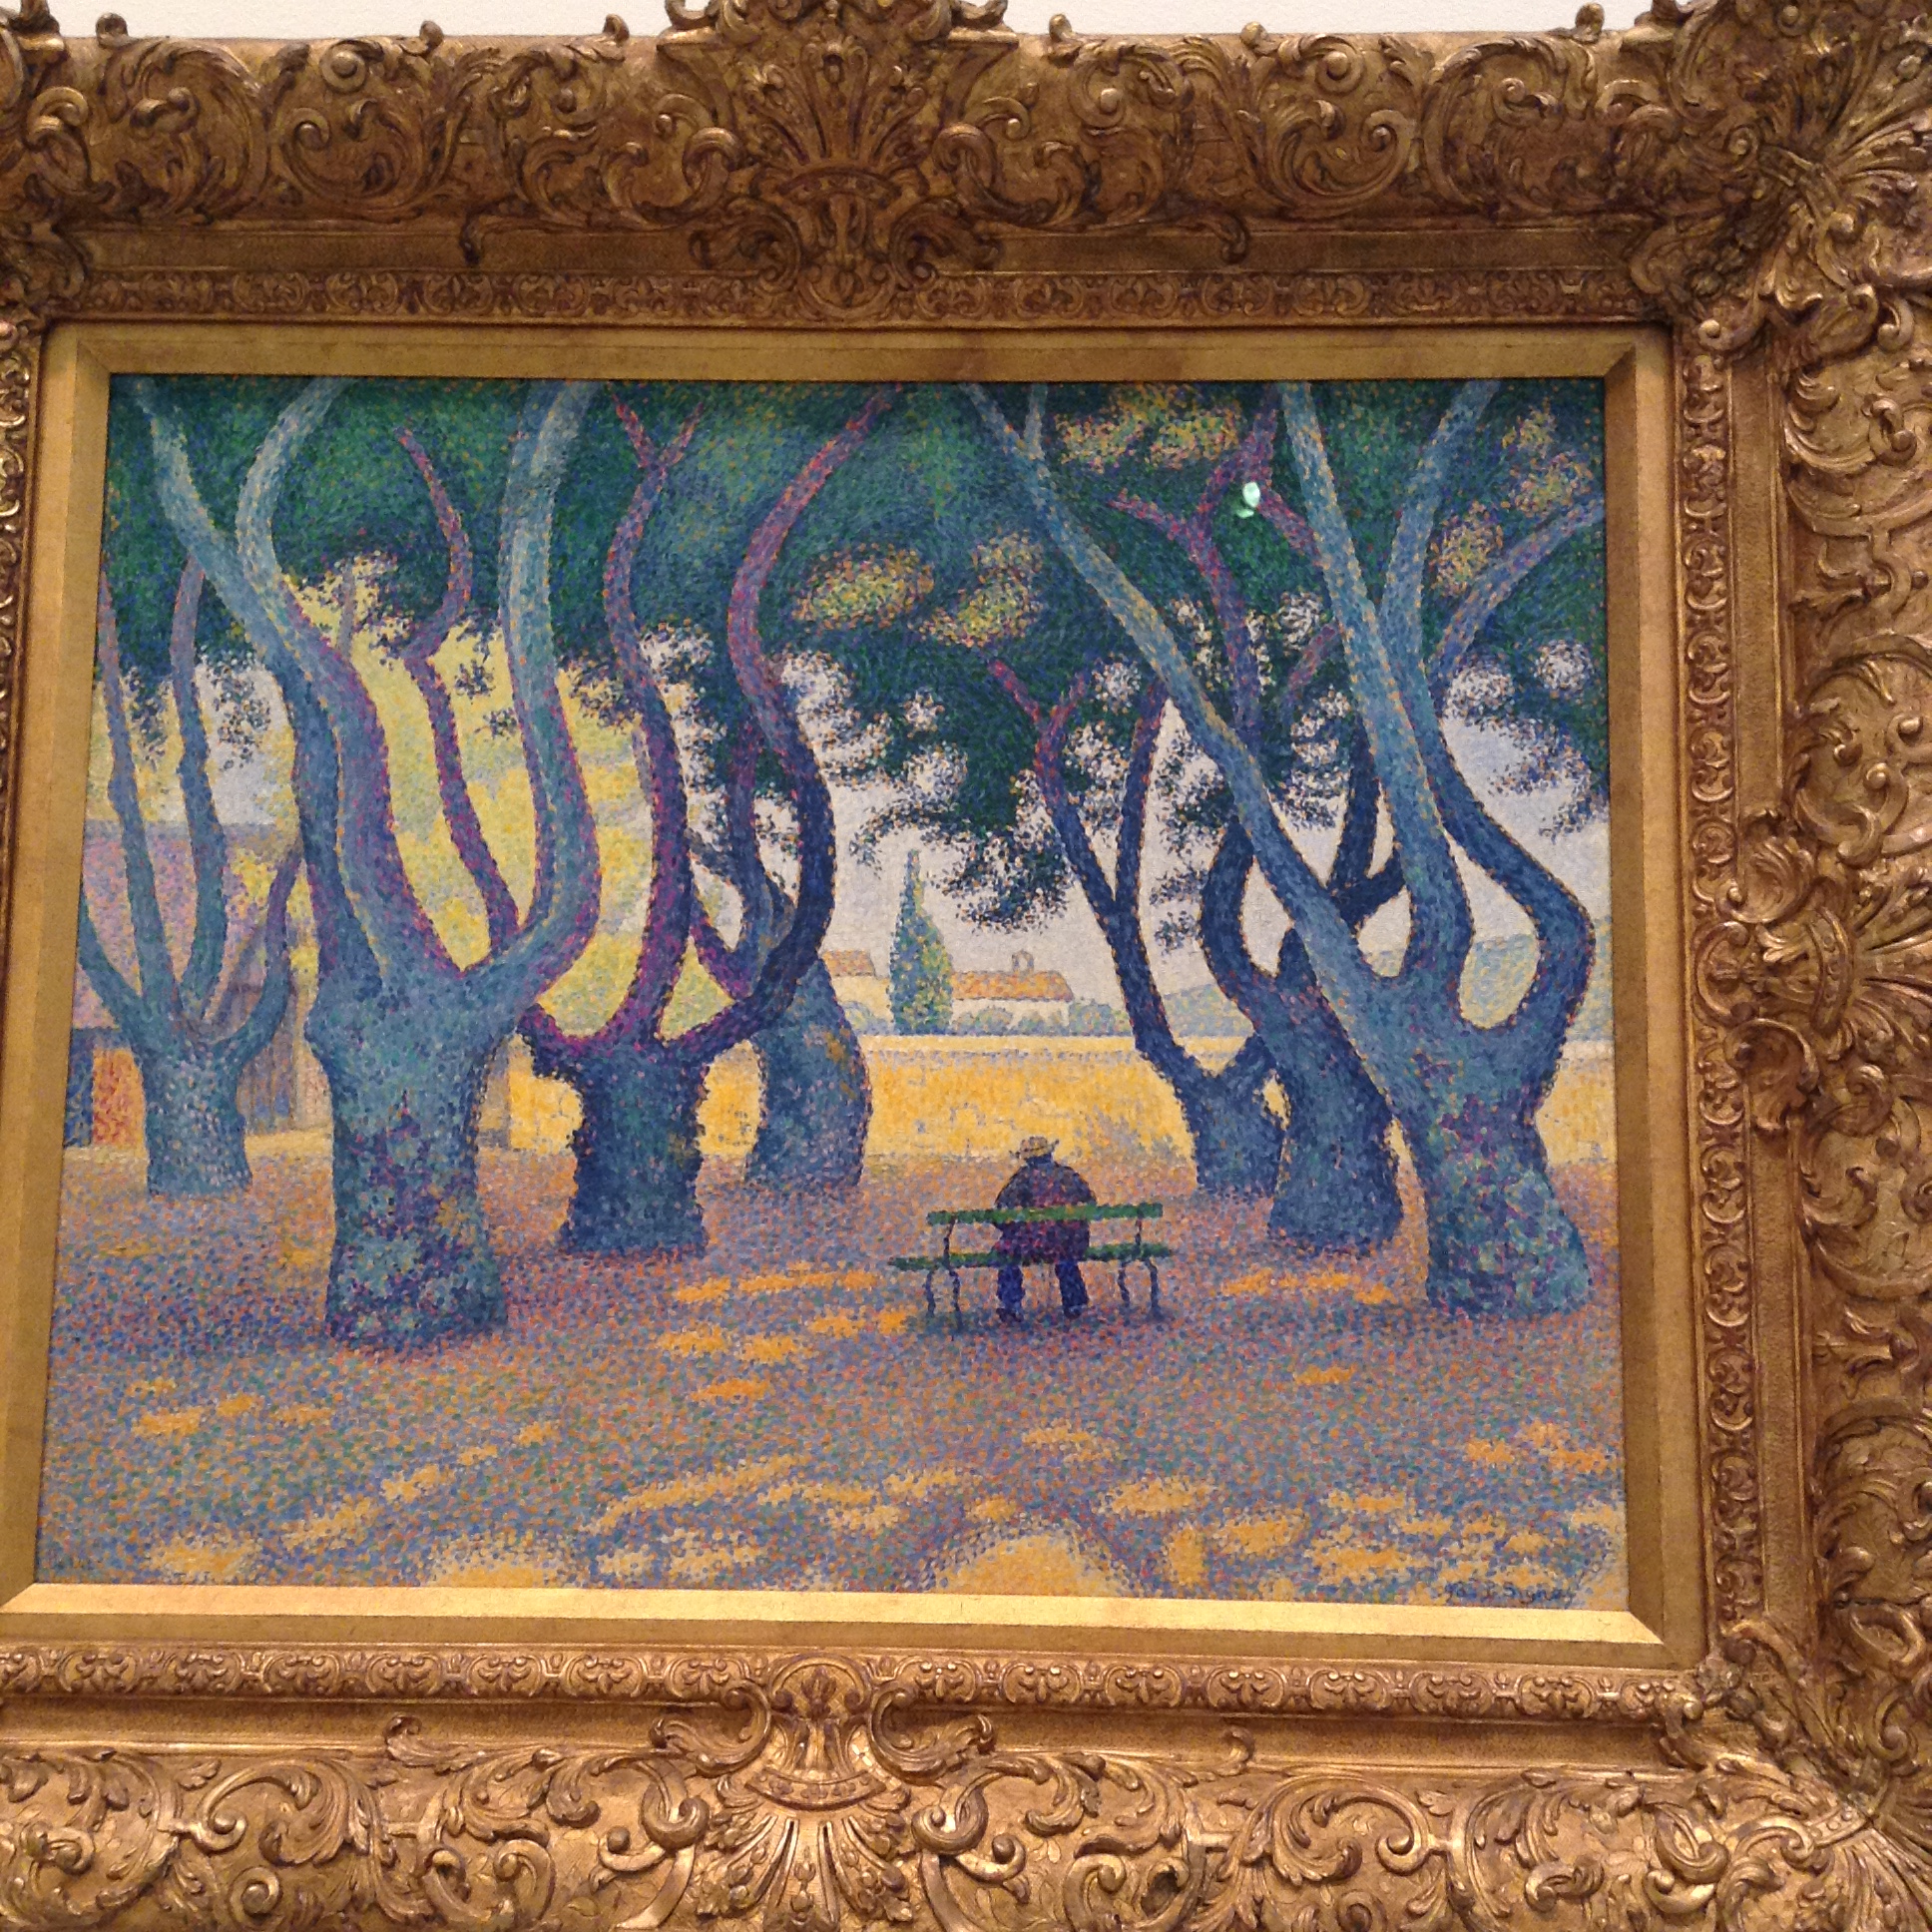 A painting of a man sitting on a park bench facing away in the park.